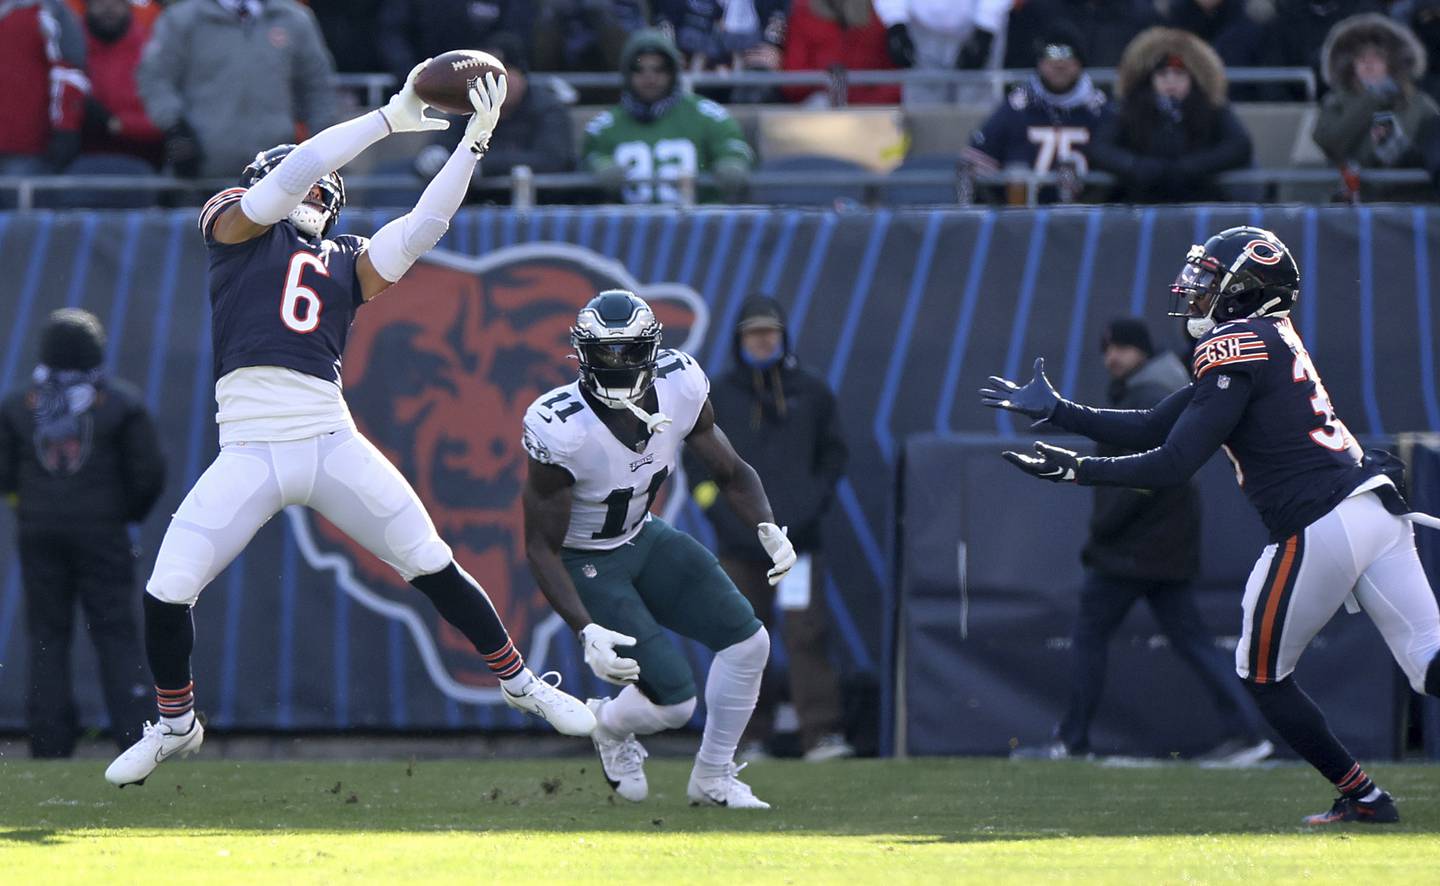 Bears cornerback Kyler Gordon intercepts the ball in the first quarter of a game against the Eagles at Soldier Field on Dec. 18, 2022.